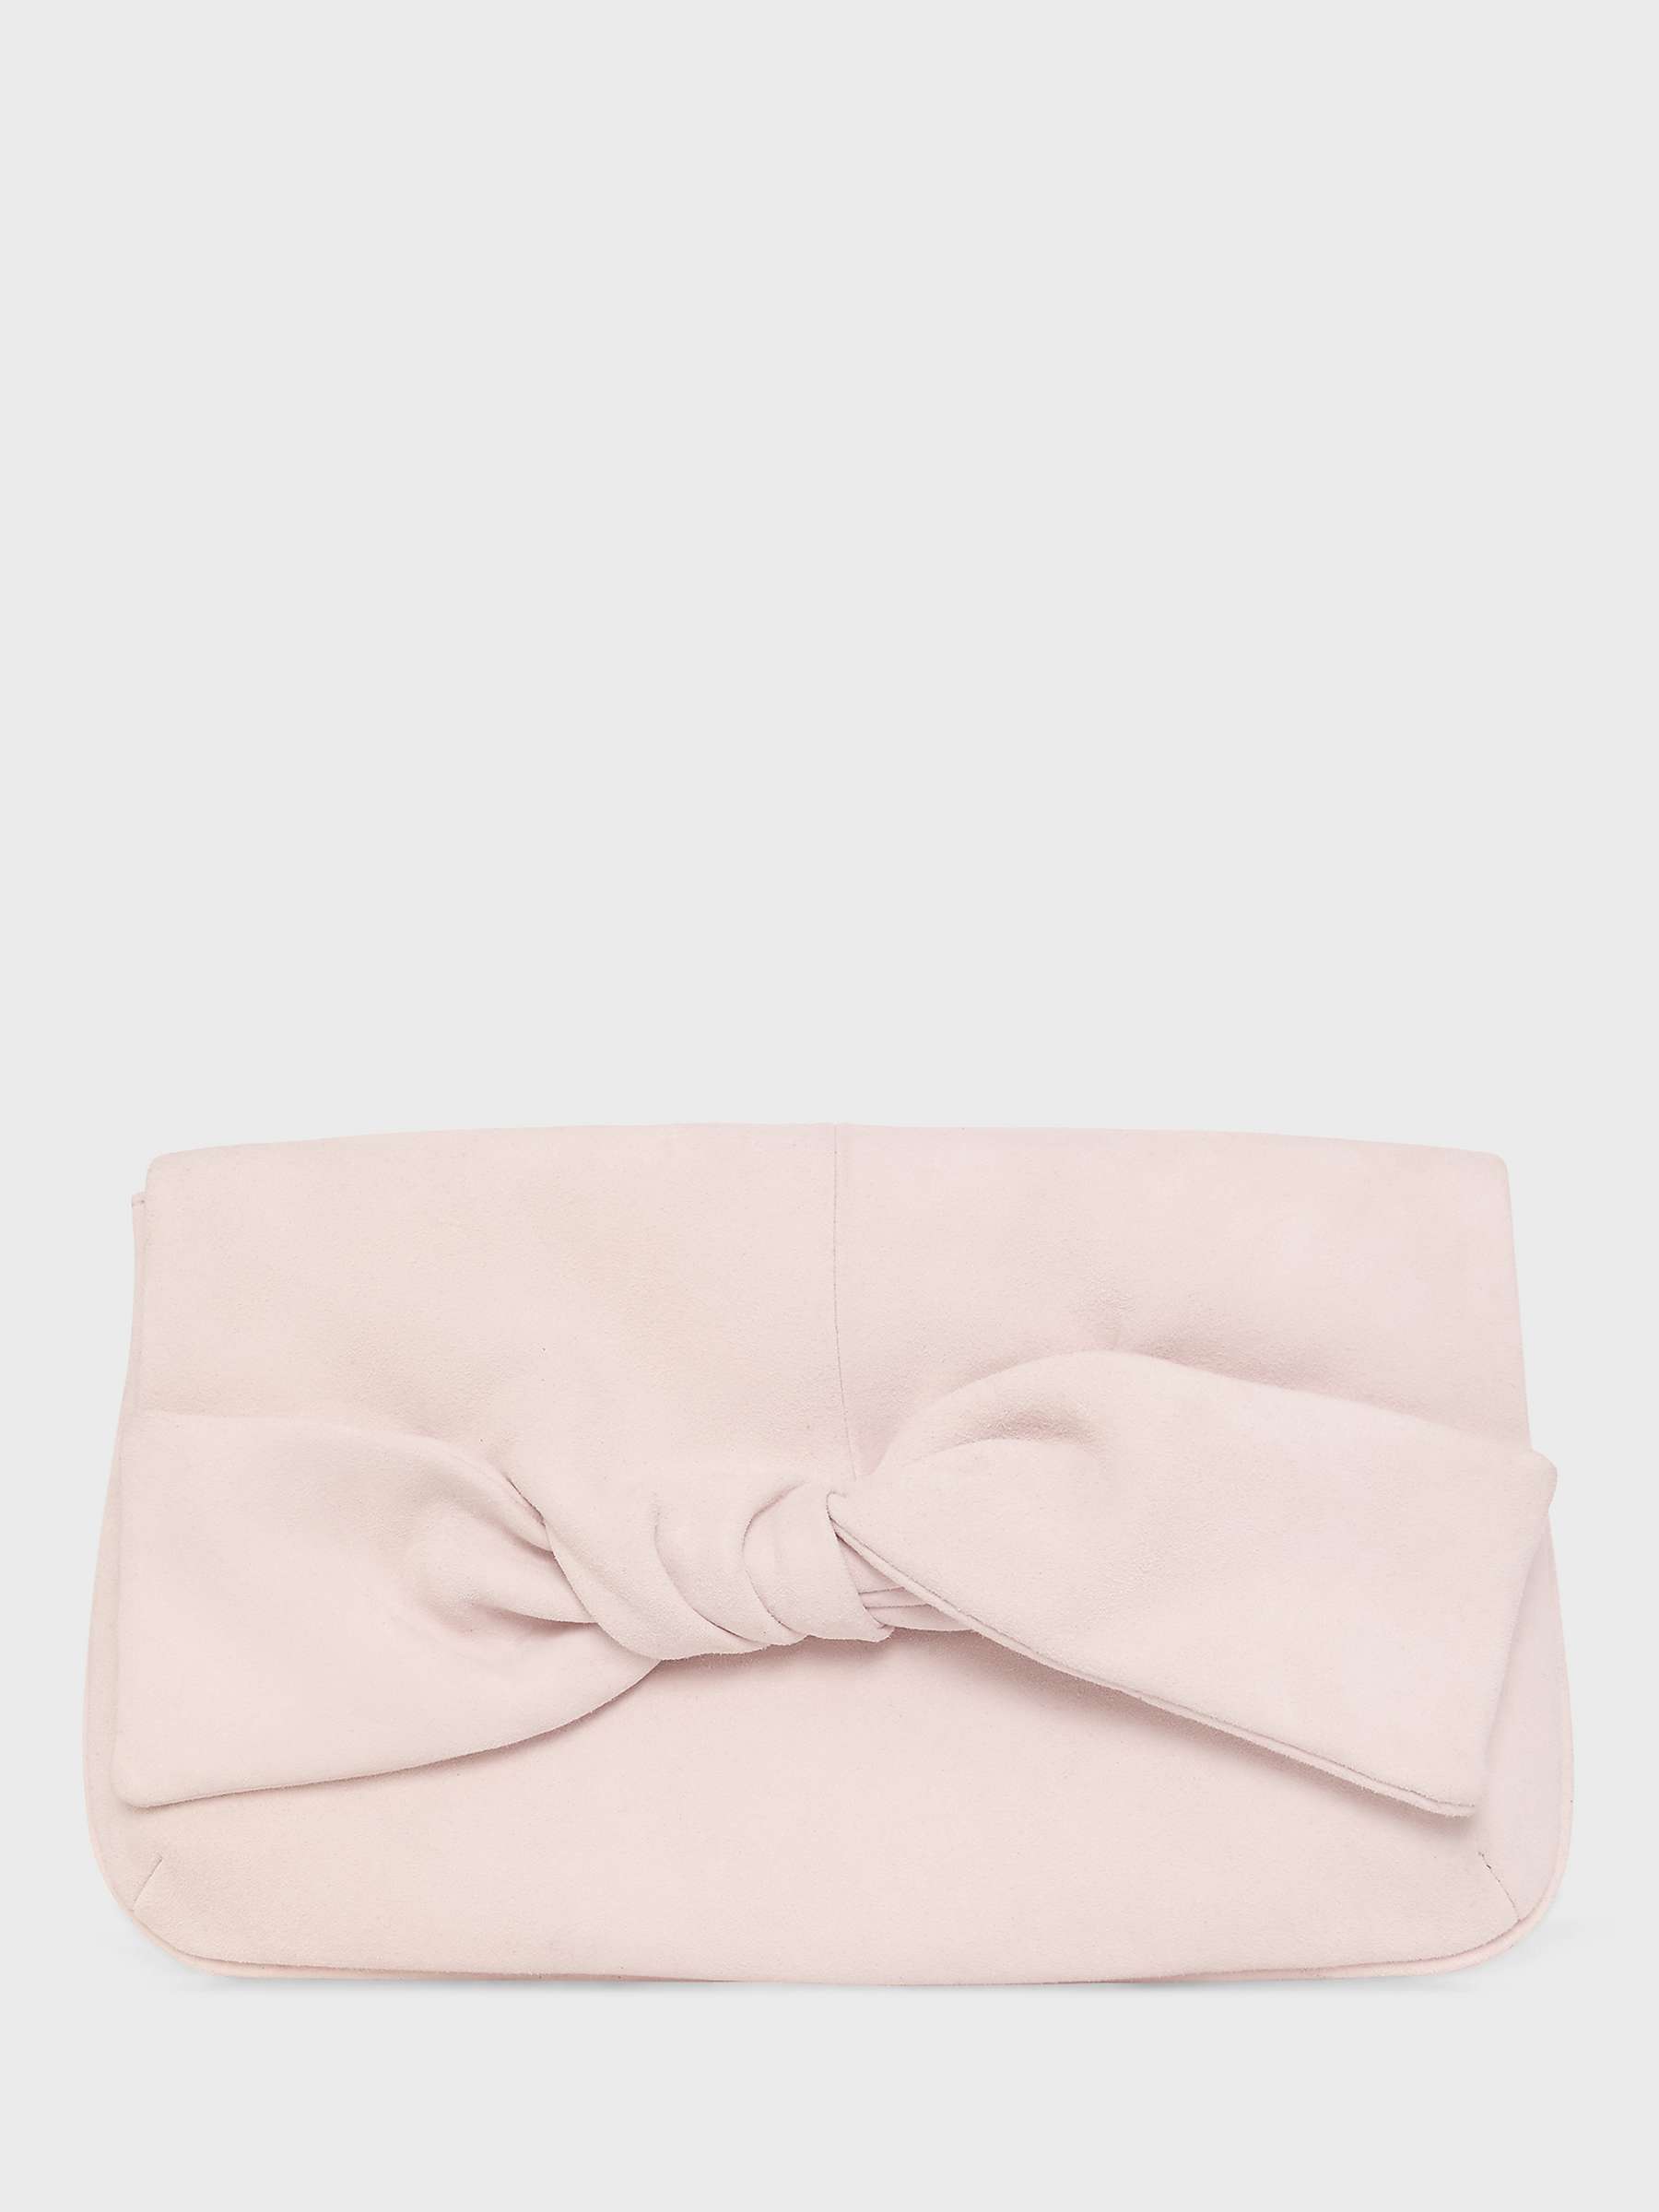 Buy Hobbs Milly Bow Clutch Bag, Bright Pink Online at johnlewis.com